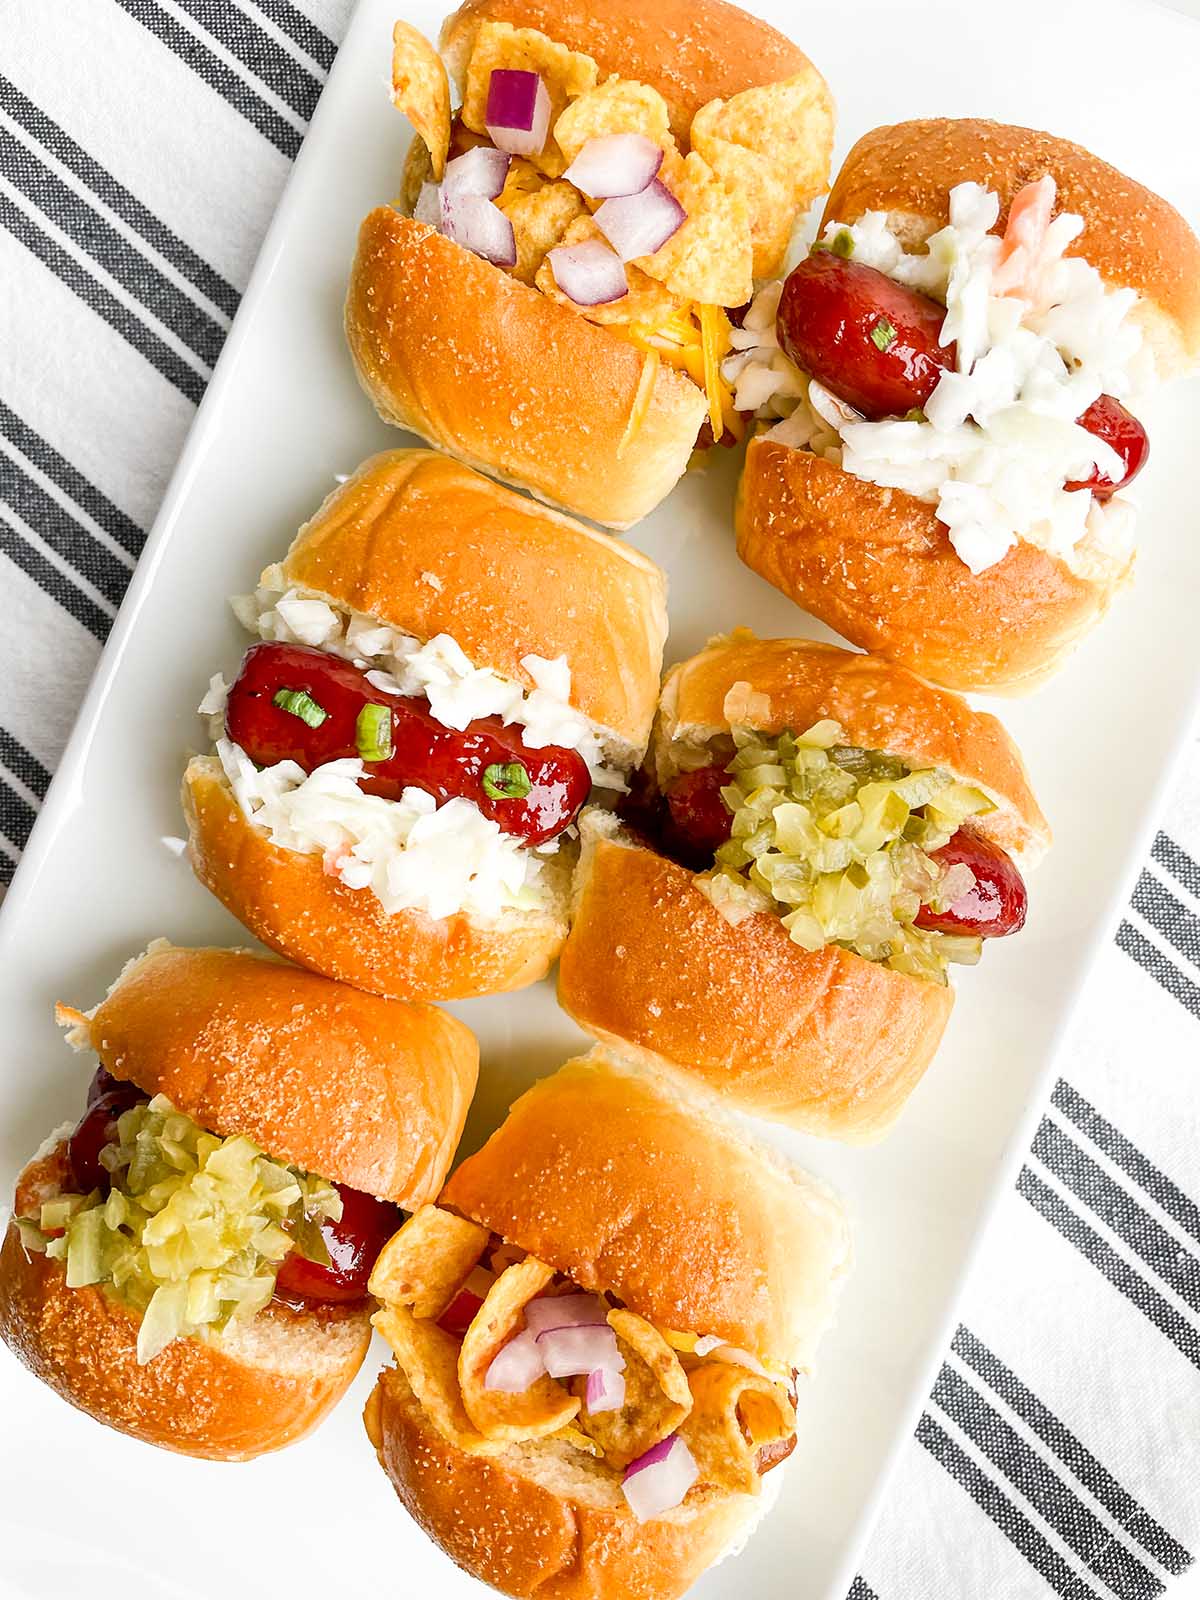 mini hot dog appetizers on a white platter